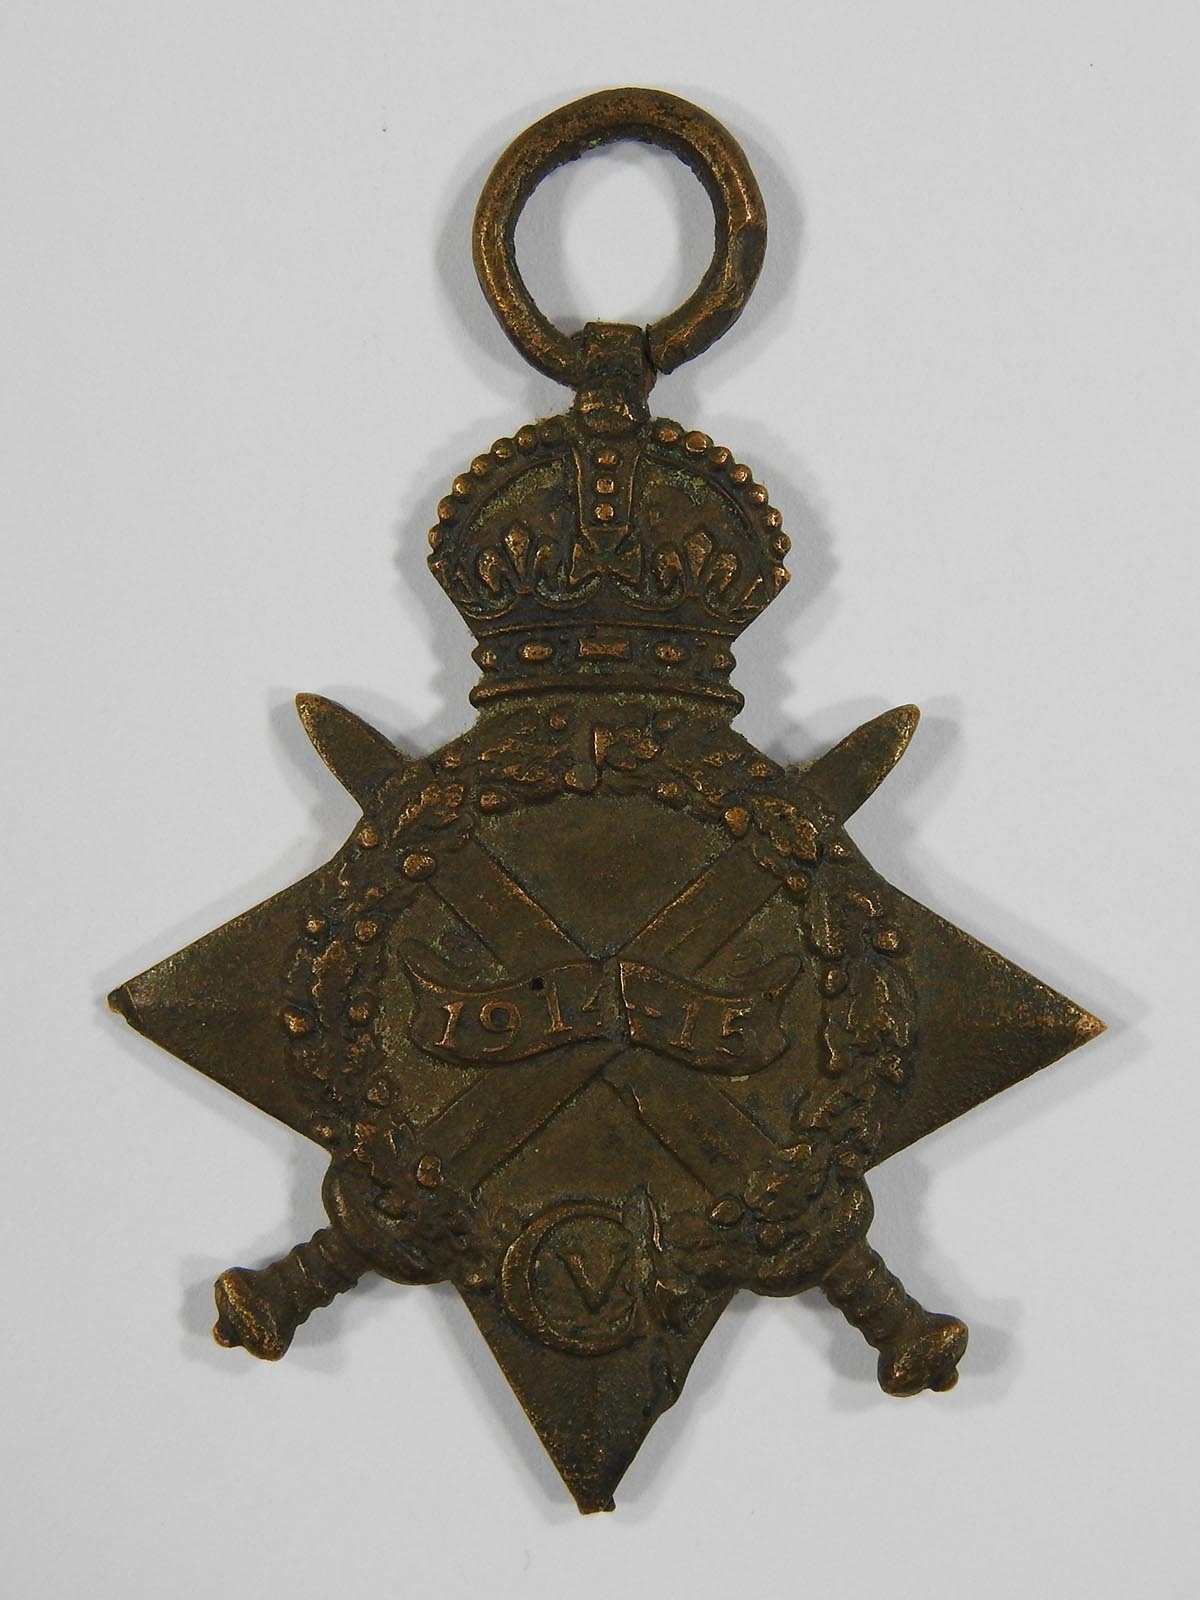 1914-1915 Star, awarded to James Driscoll